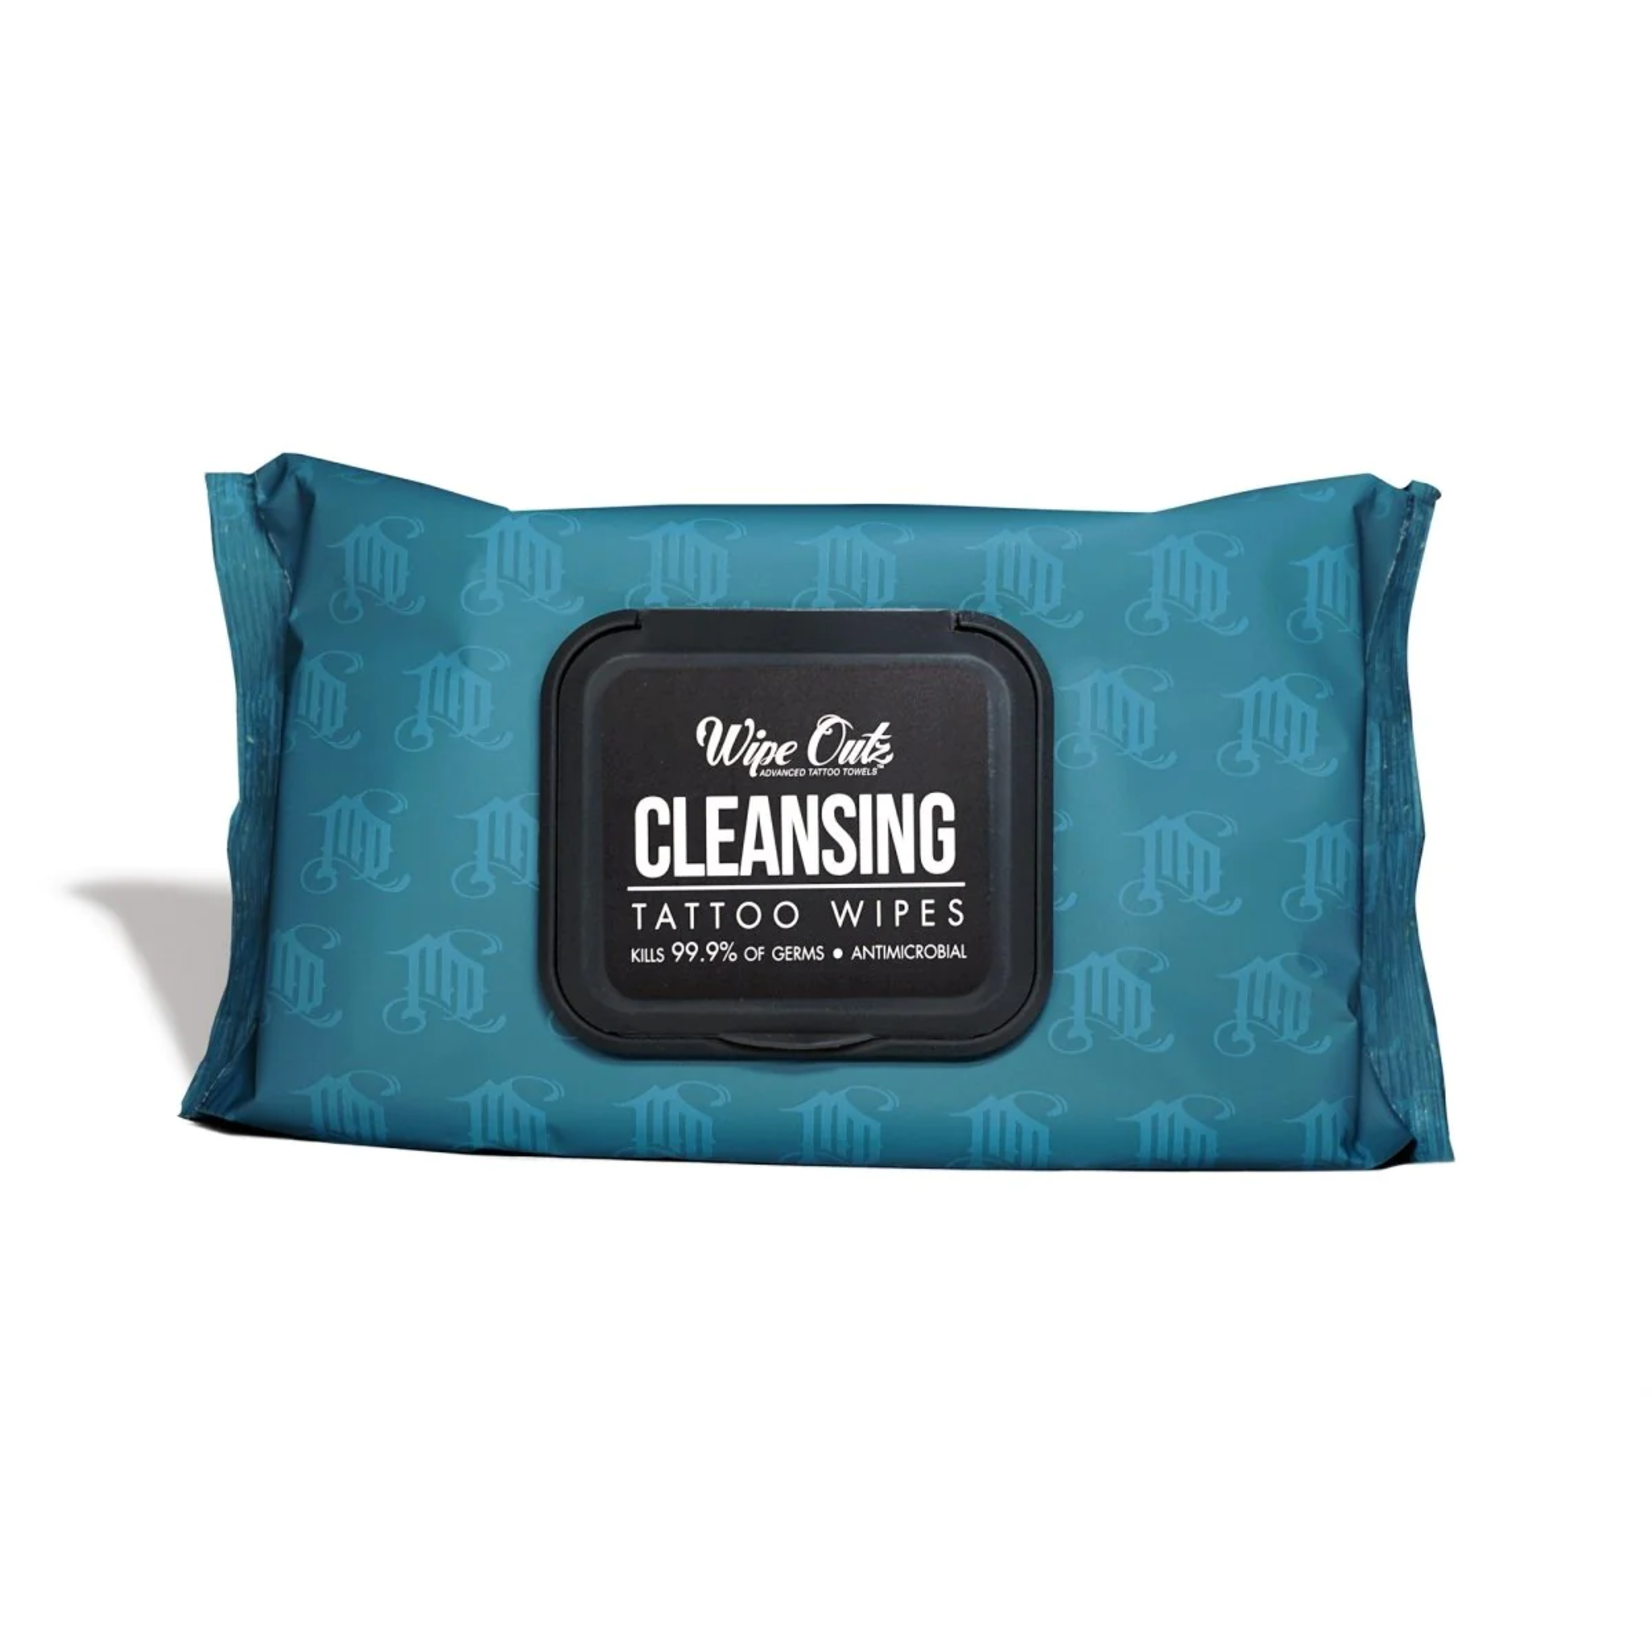 WIPE OUTZ CLEANSING TATTOO WIPES (40 COUNT PER PACK)